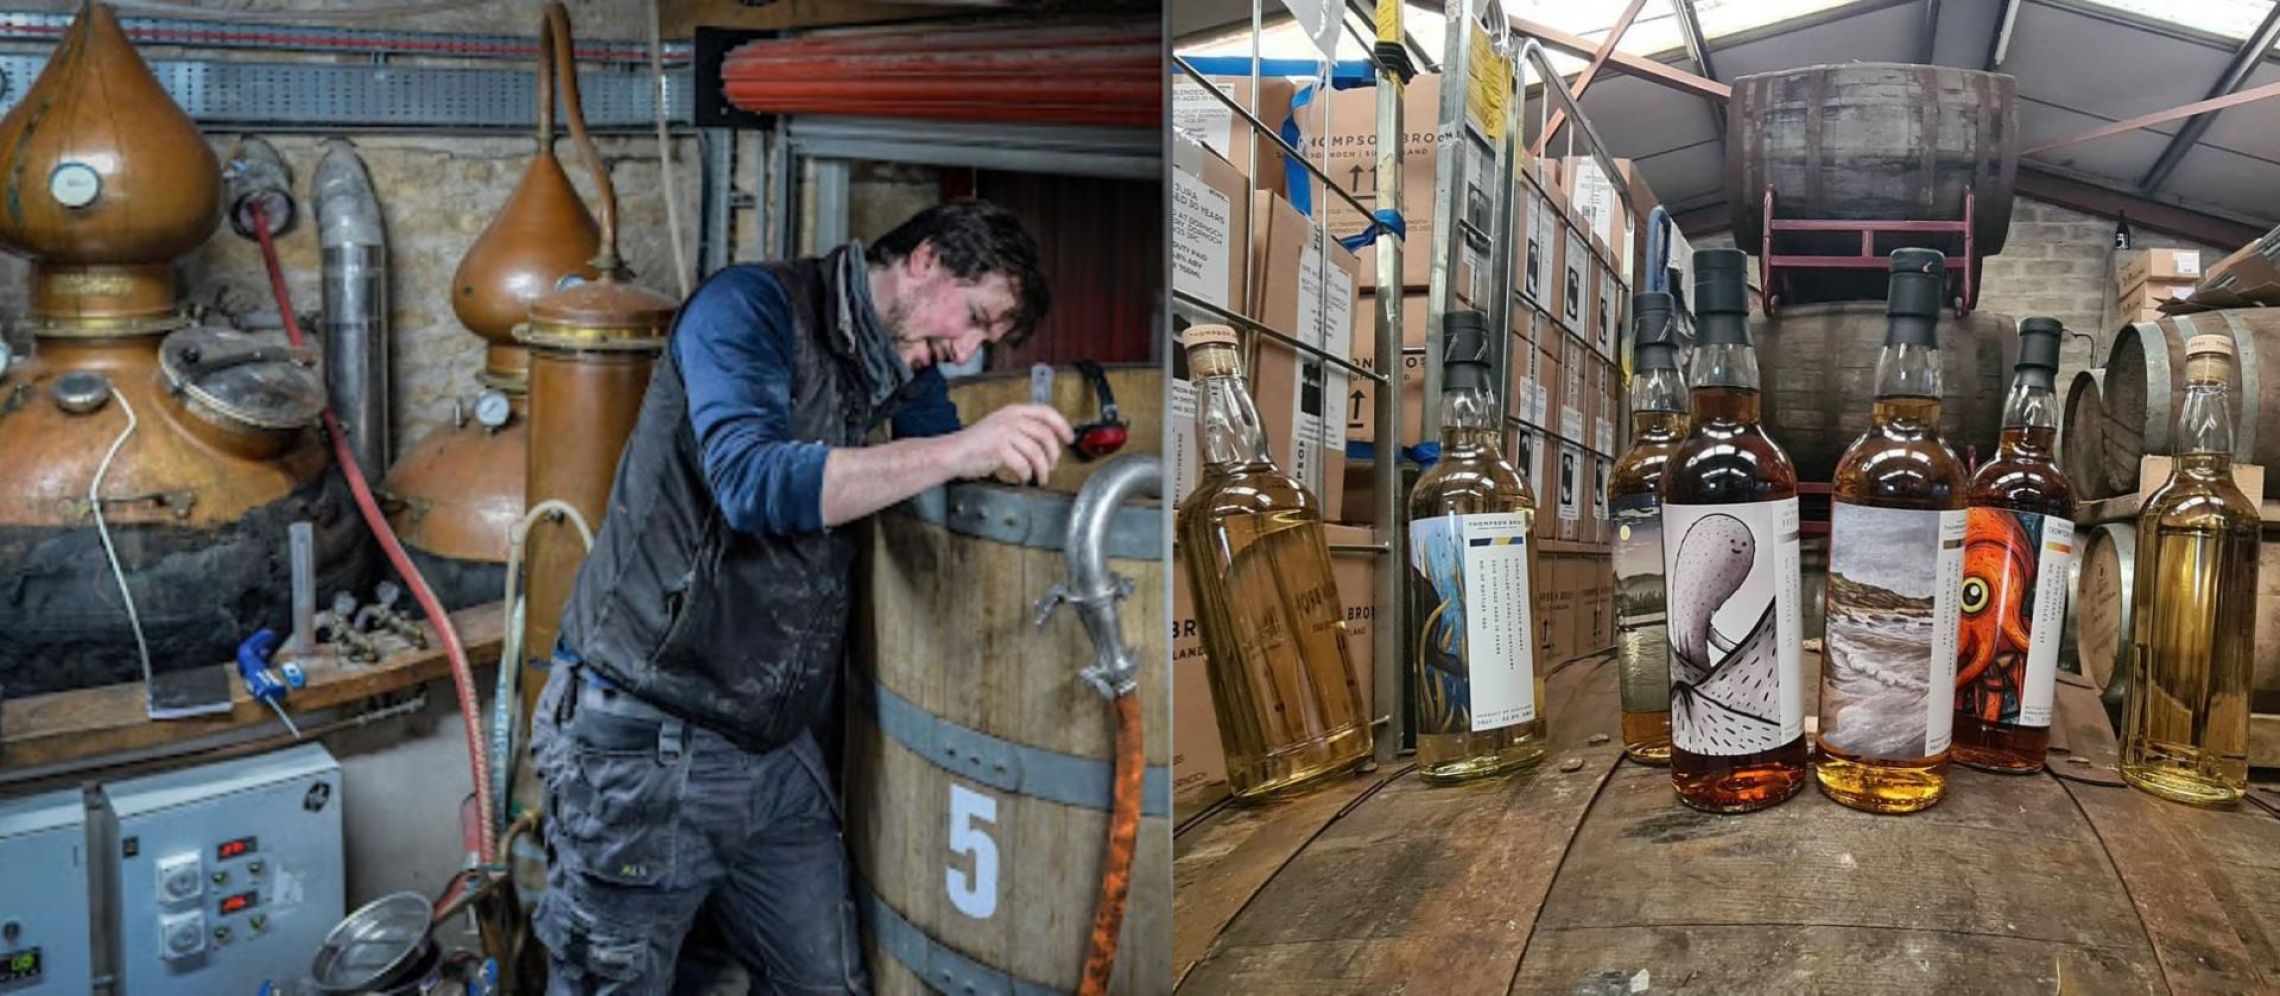 Photo for: My Gateway To The Spirits Industry Was Through Hospitality, Says Euan 